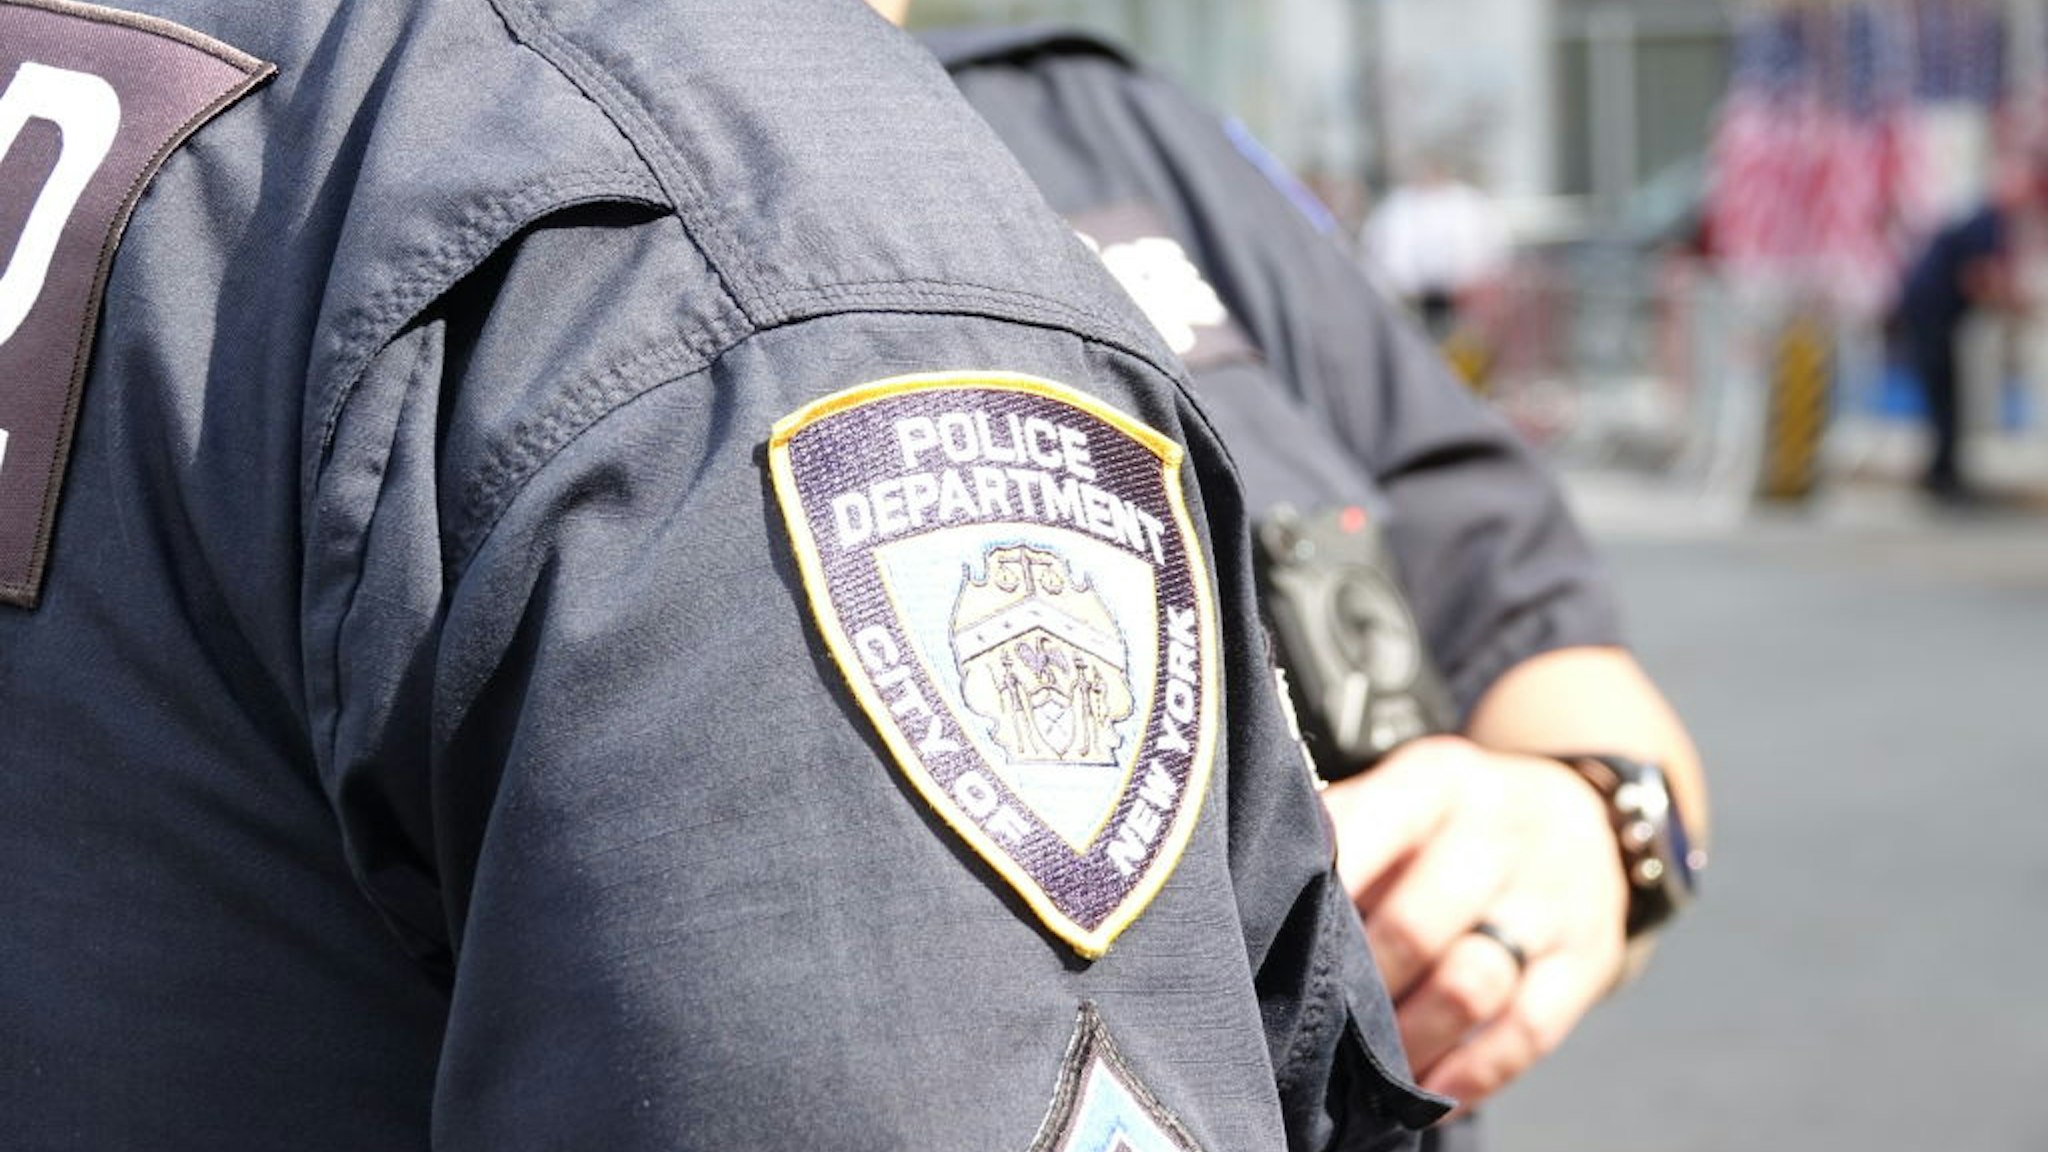 The New York City Police Department (NYPD) logo can be seen on a uniform during the 18th anniversary of the September 11, 2001 terrorist attacks near Ground Zero.